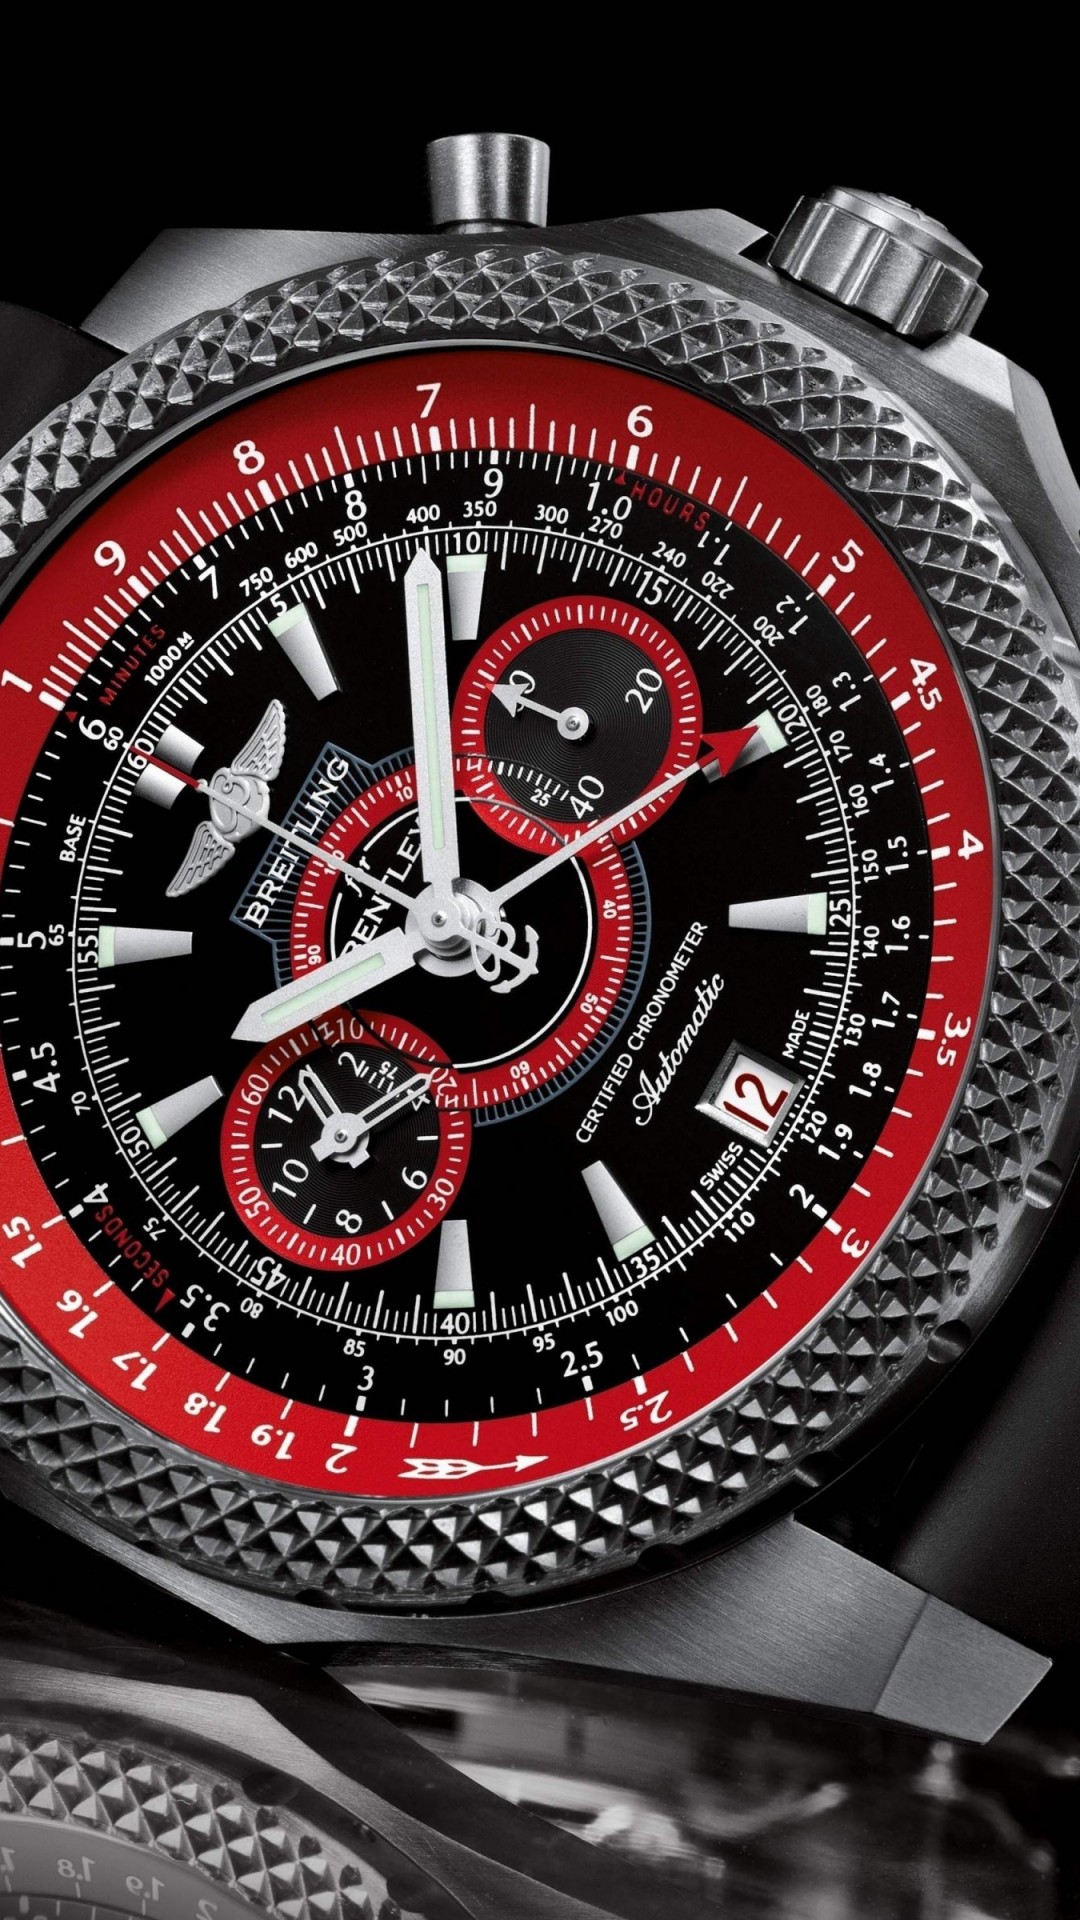 Breitling Watch Wallpaper for LG G2